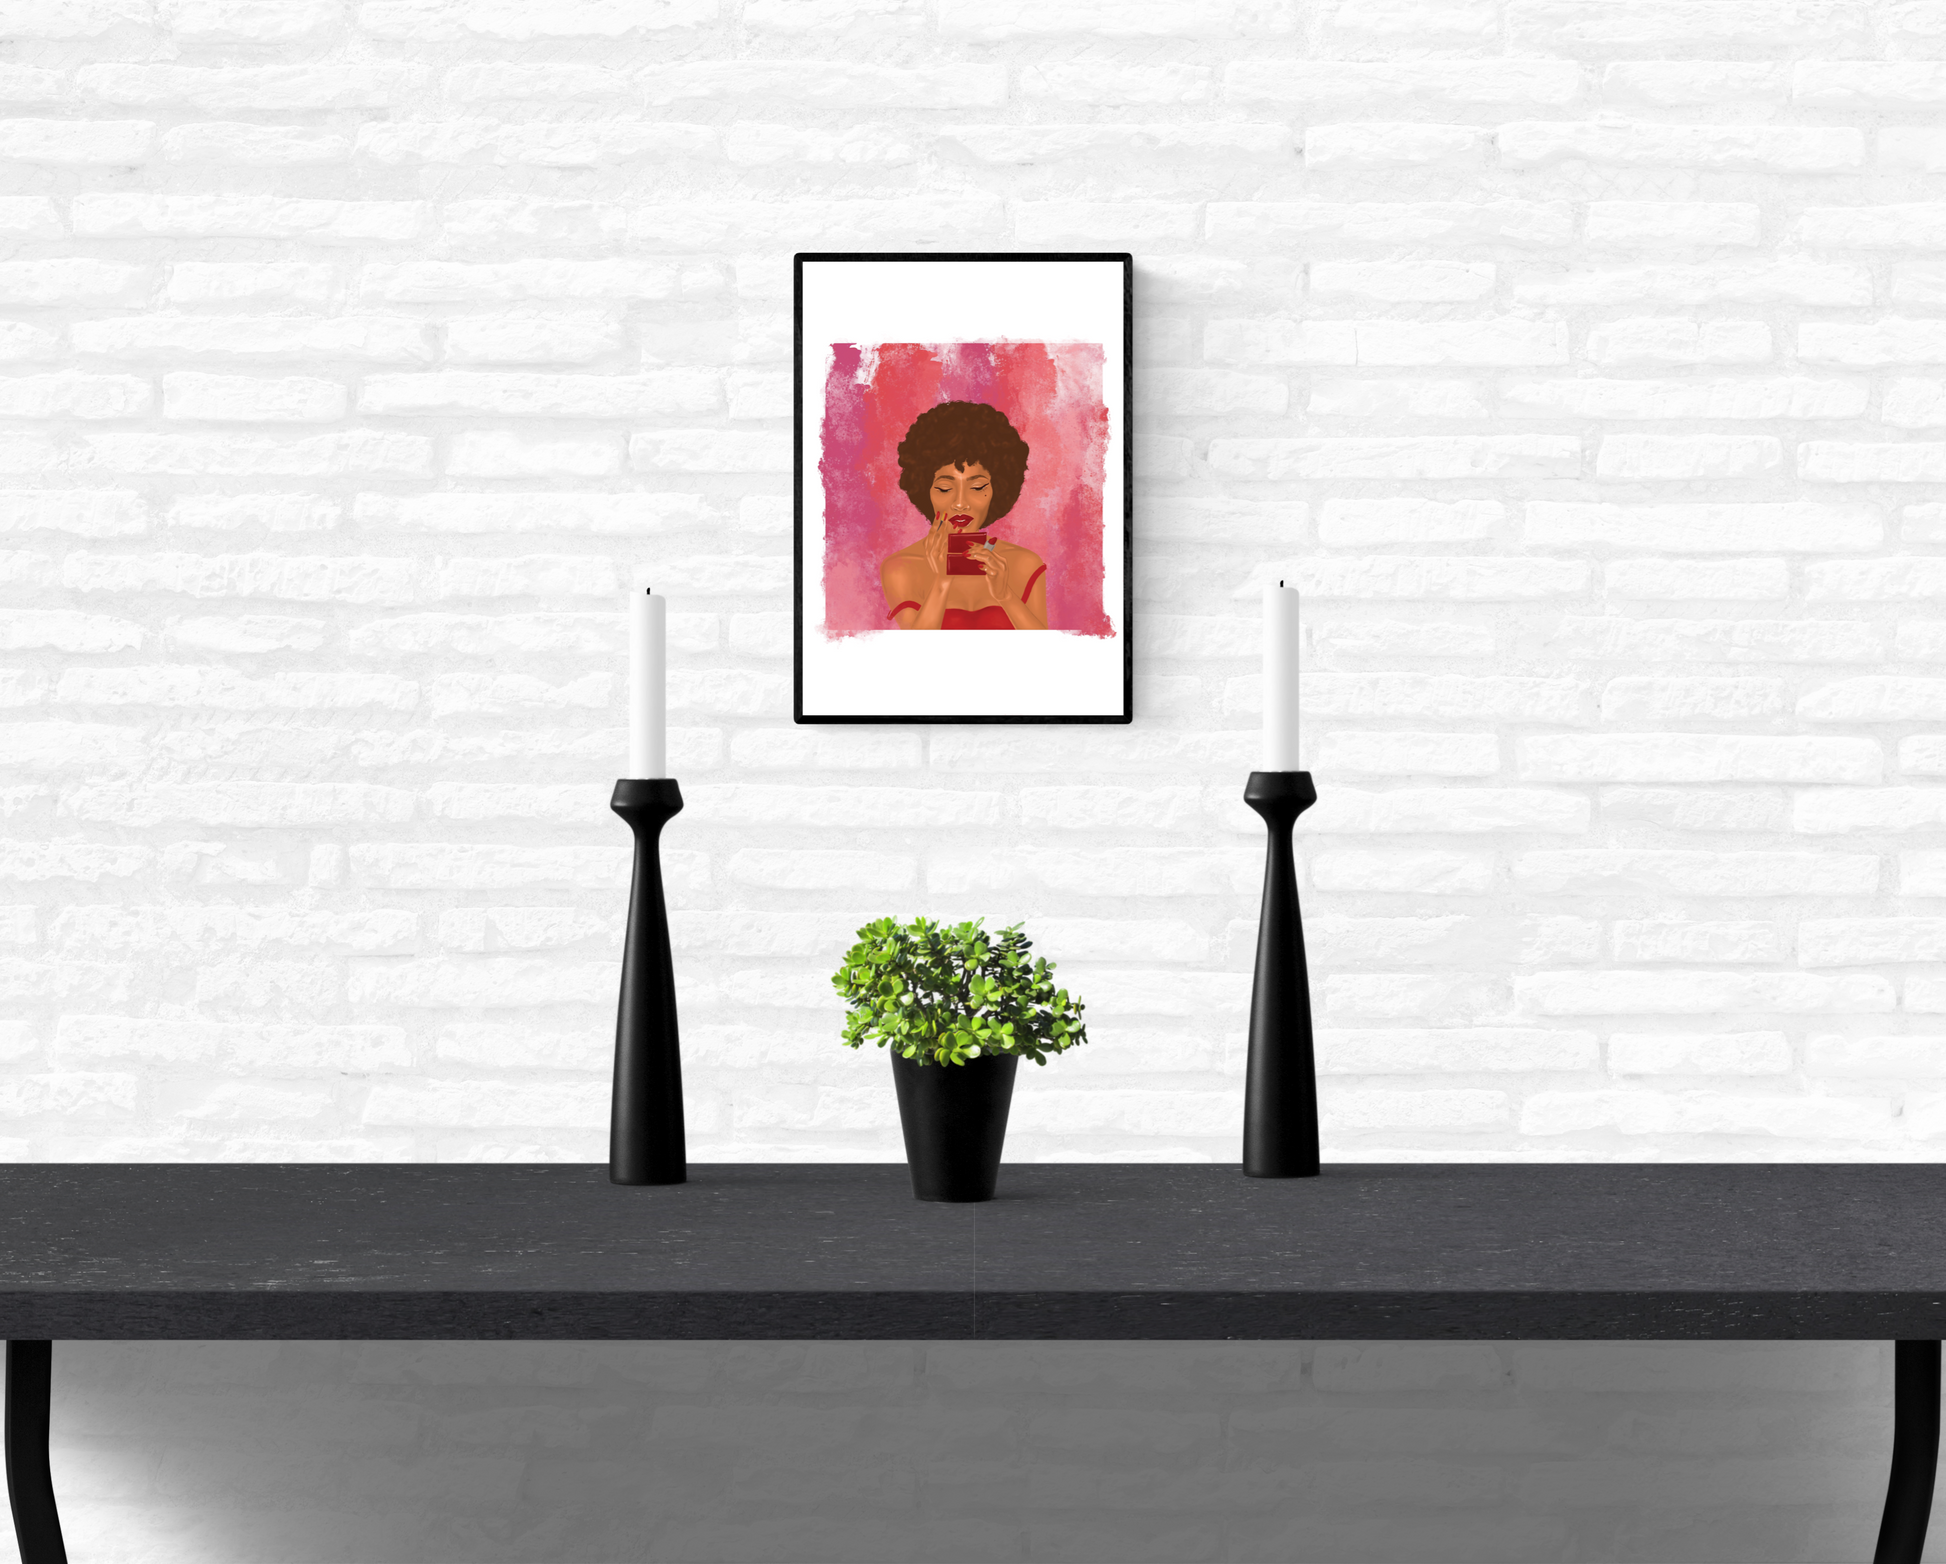 Wall illustration hanging on a white brick wall above a table